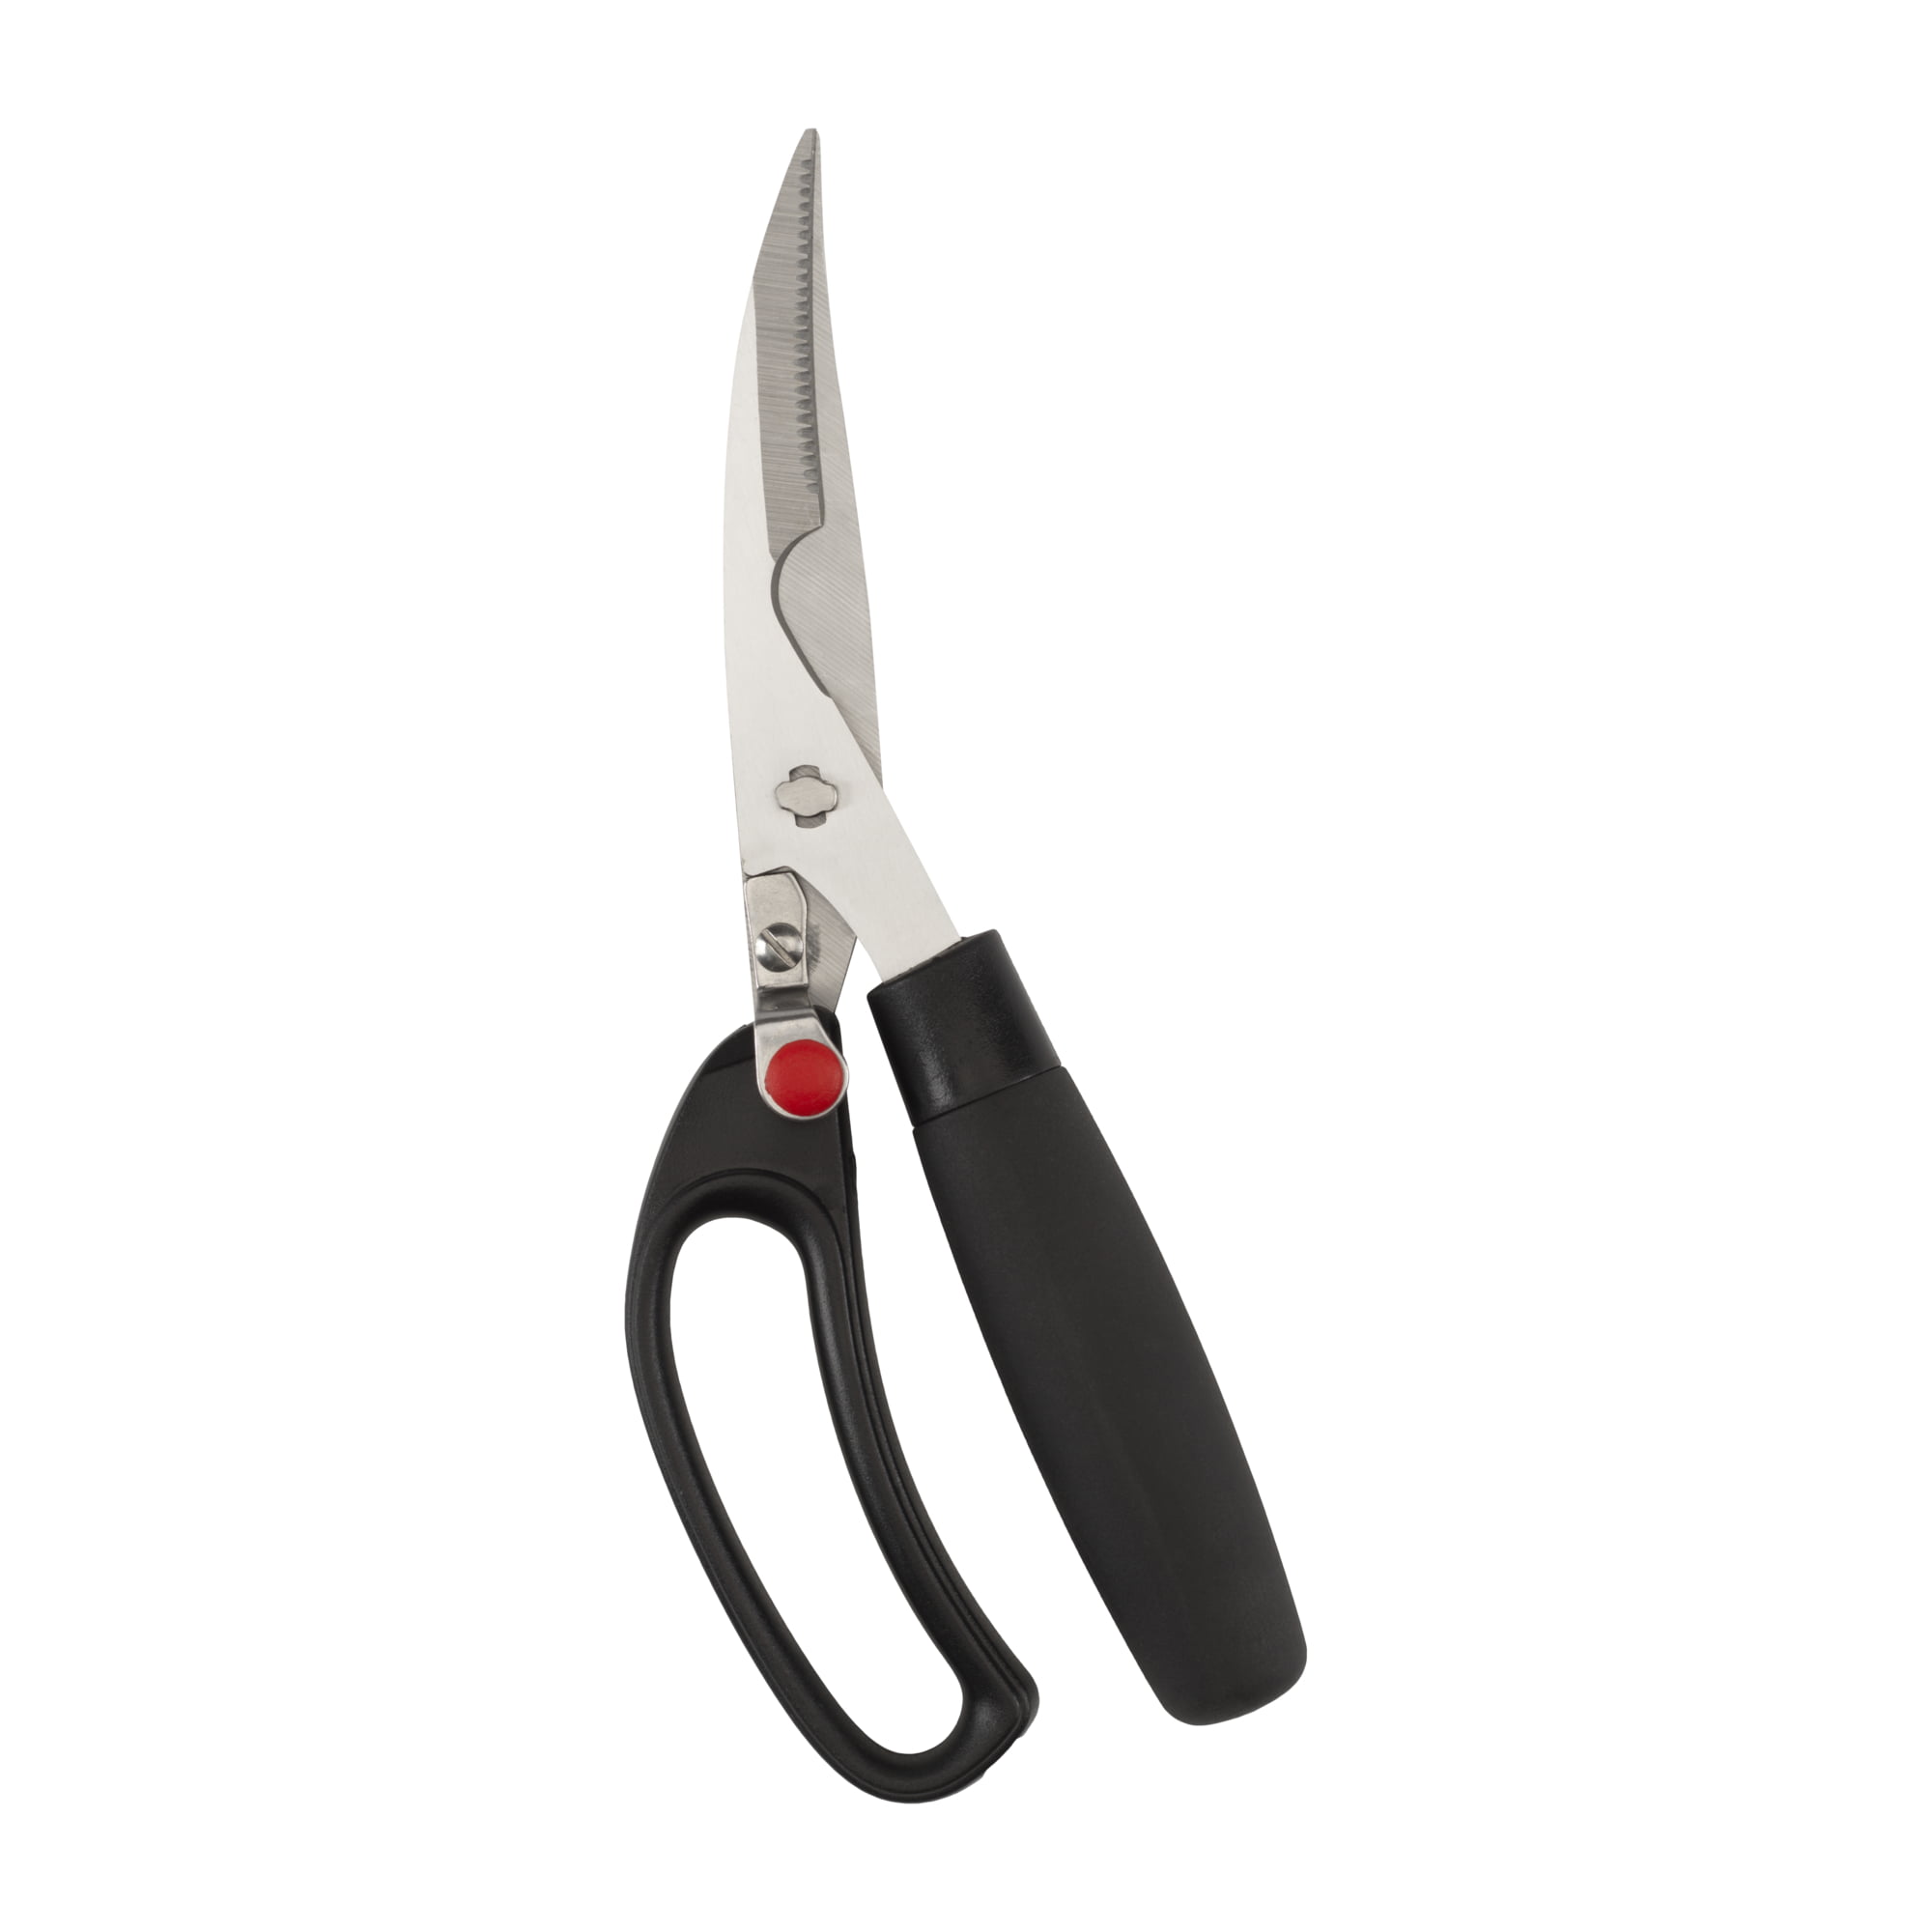  Gela Global SC-0285 Poultry Shears Sharp & Extra Strong Scissors,  Black/Grey: Home & Kitchen